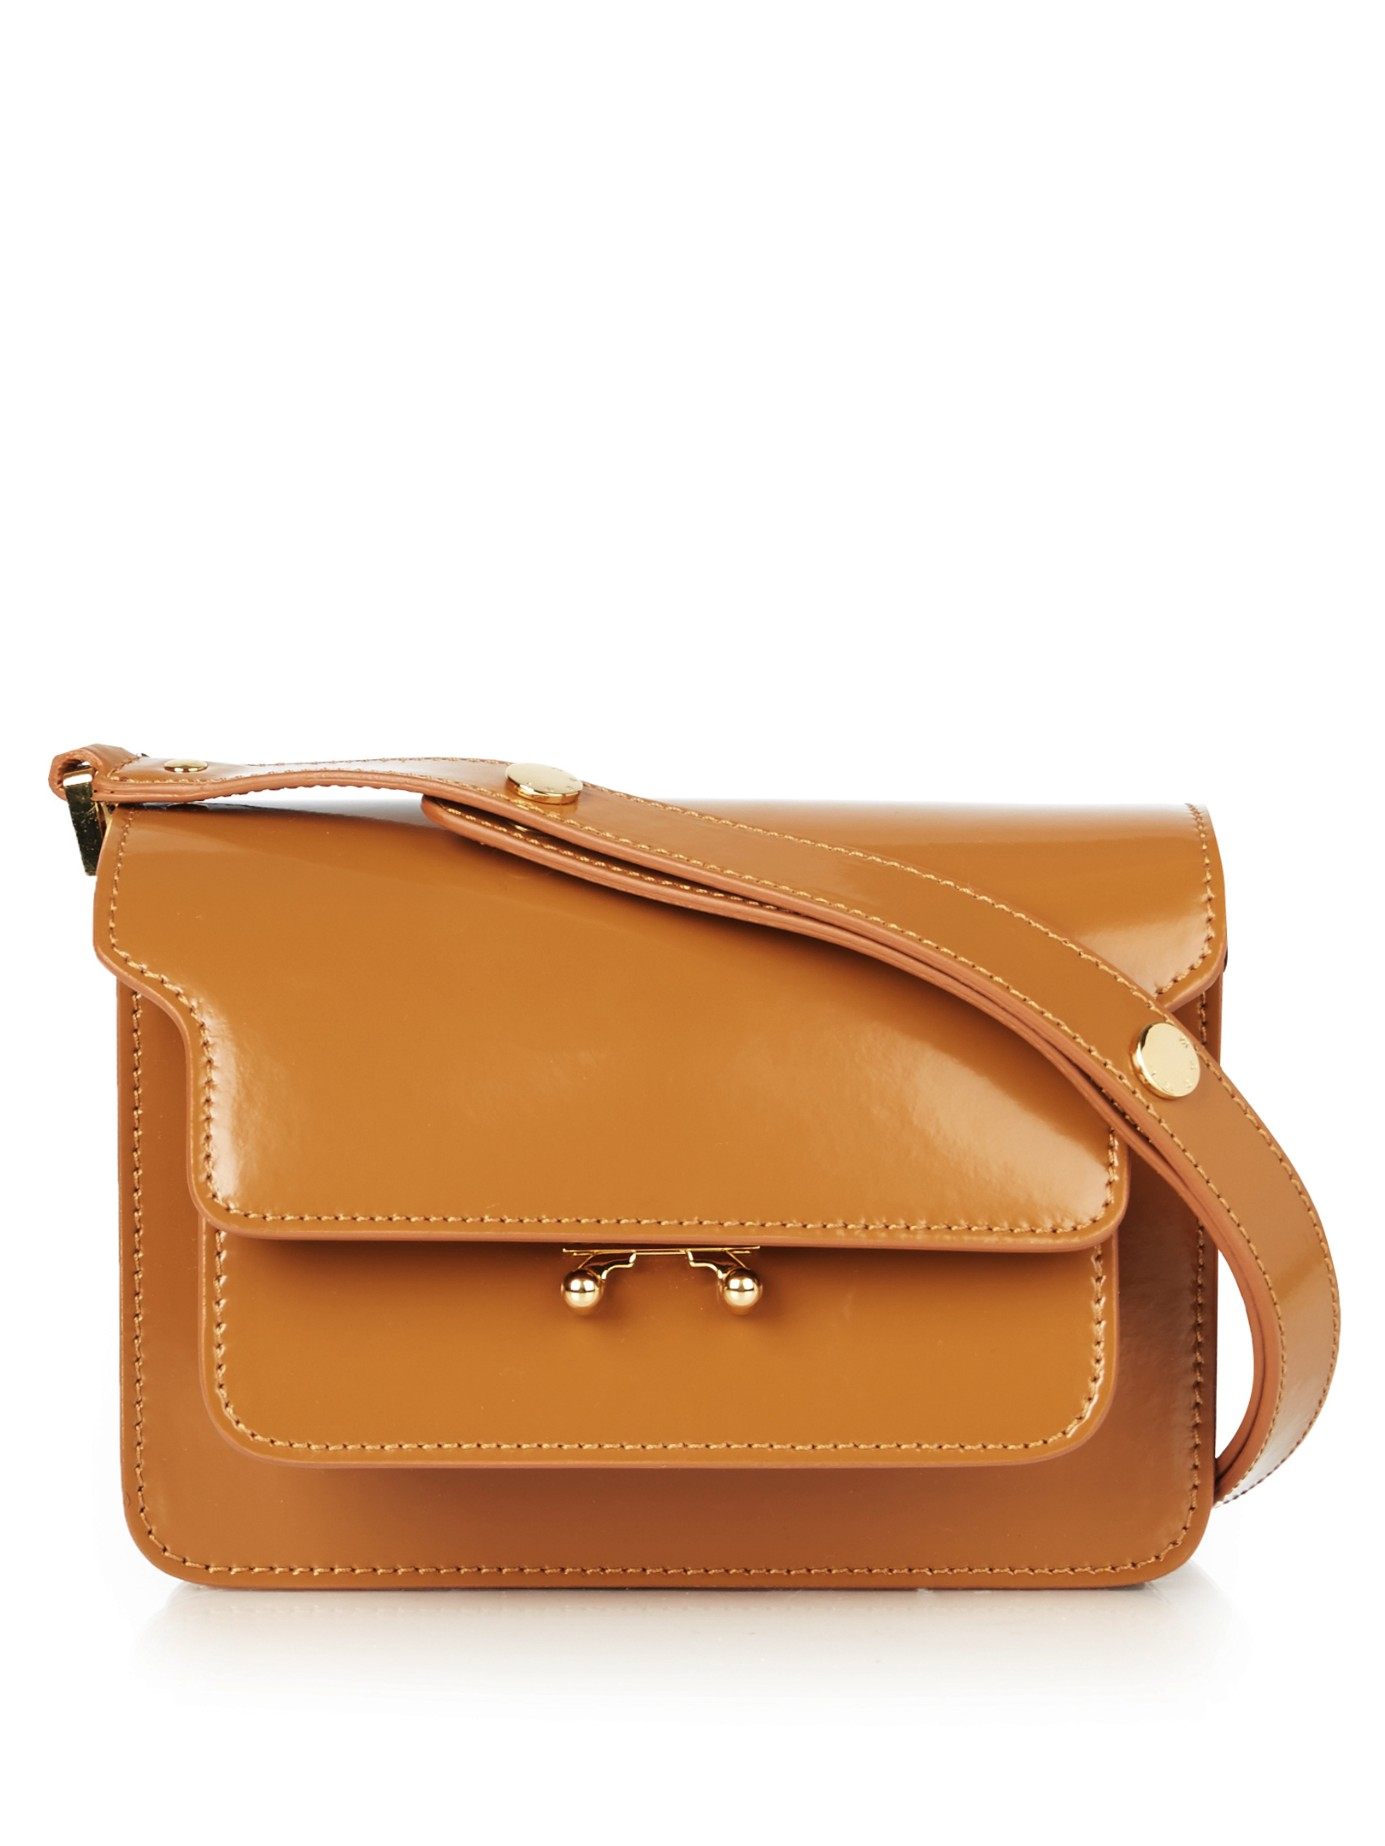 Marni, Bags, New Marni Mini Trunk Messenger Bag Buttery Soft Leather Rust  Gold Toned 29